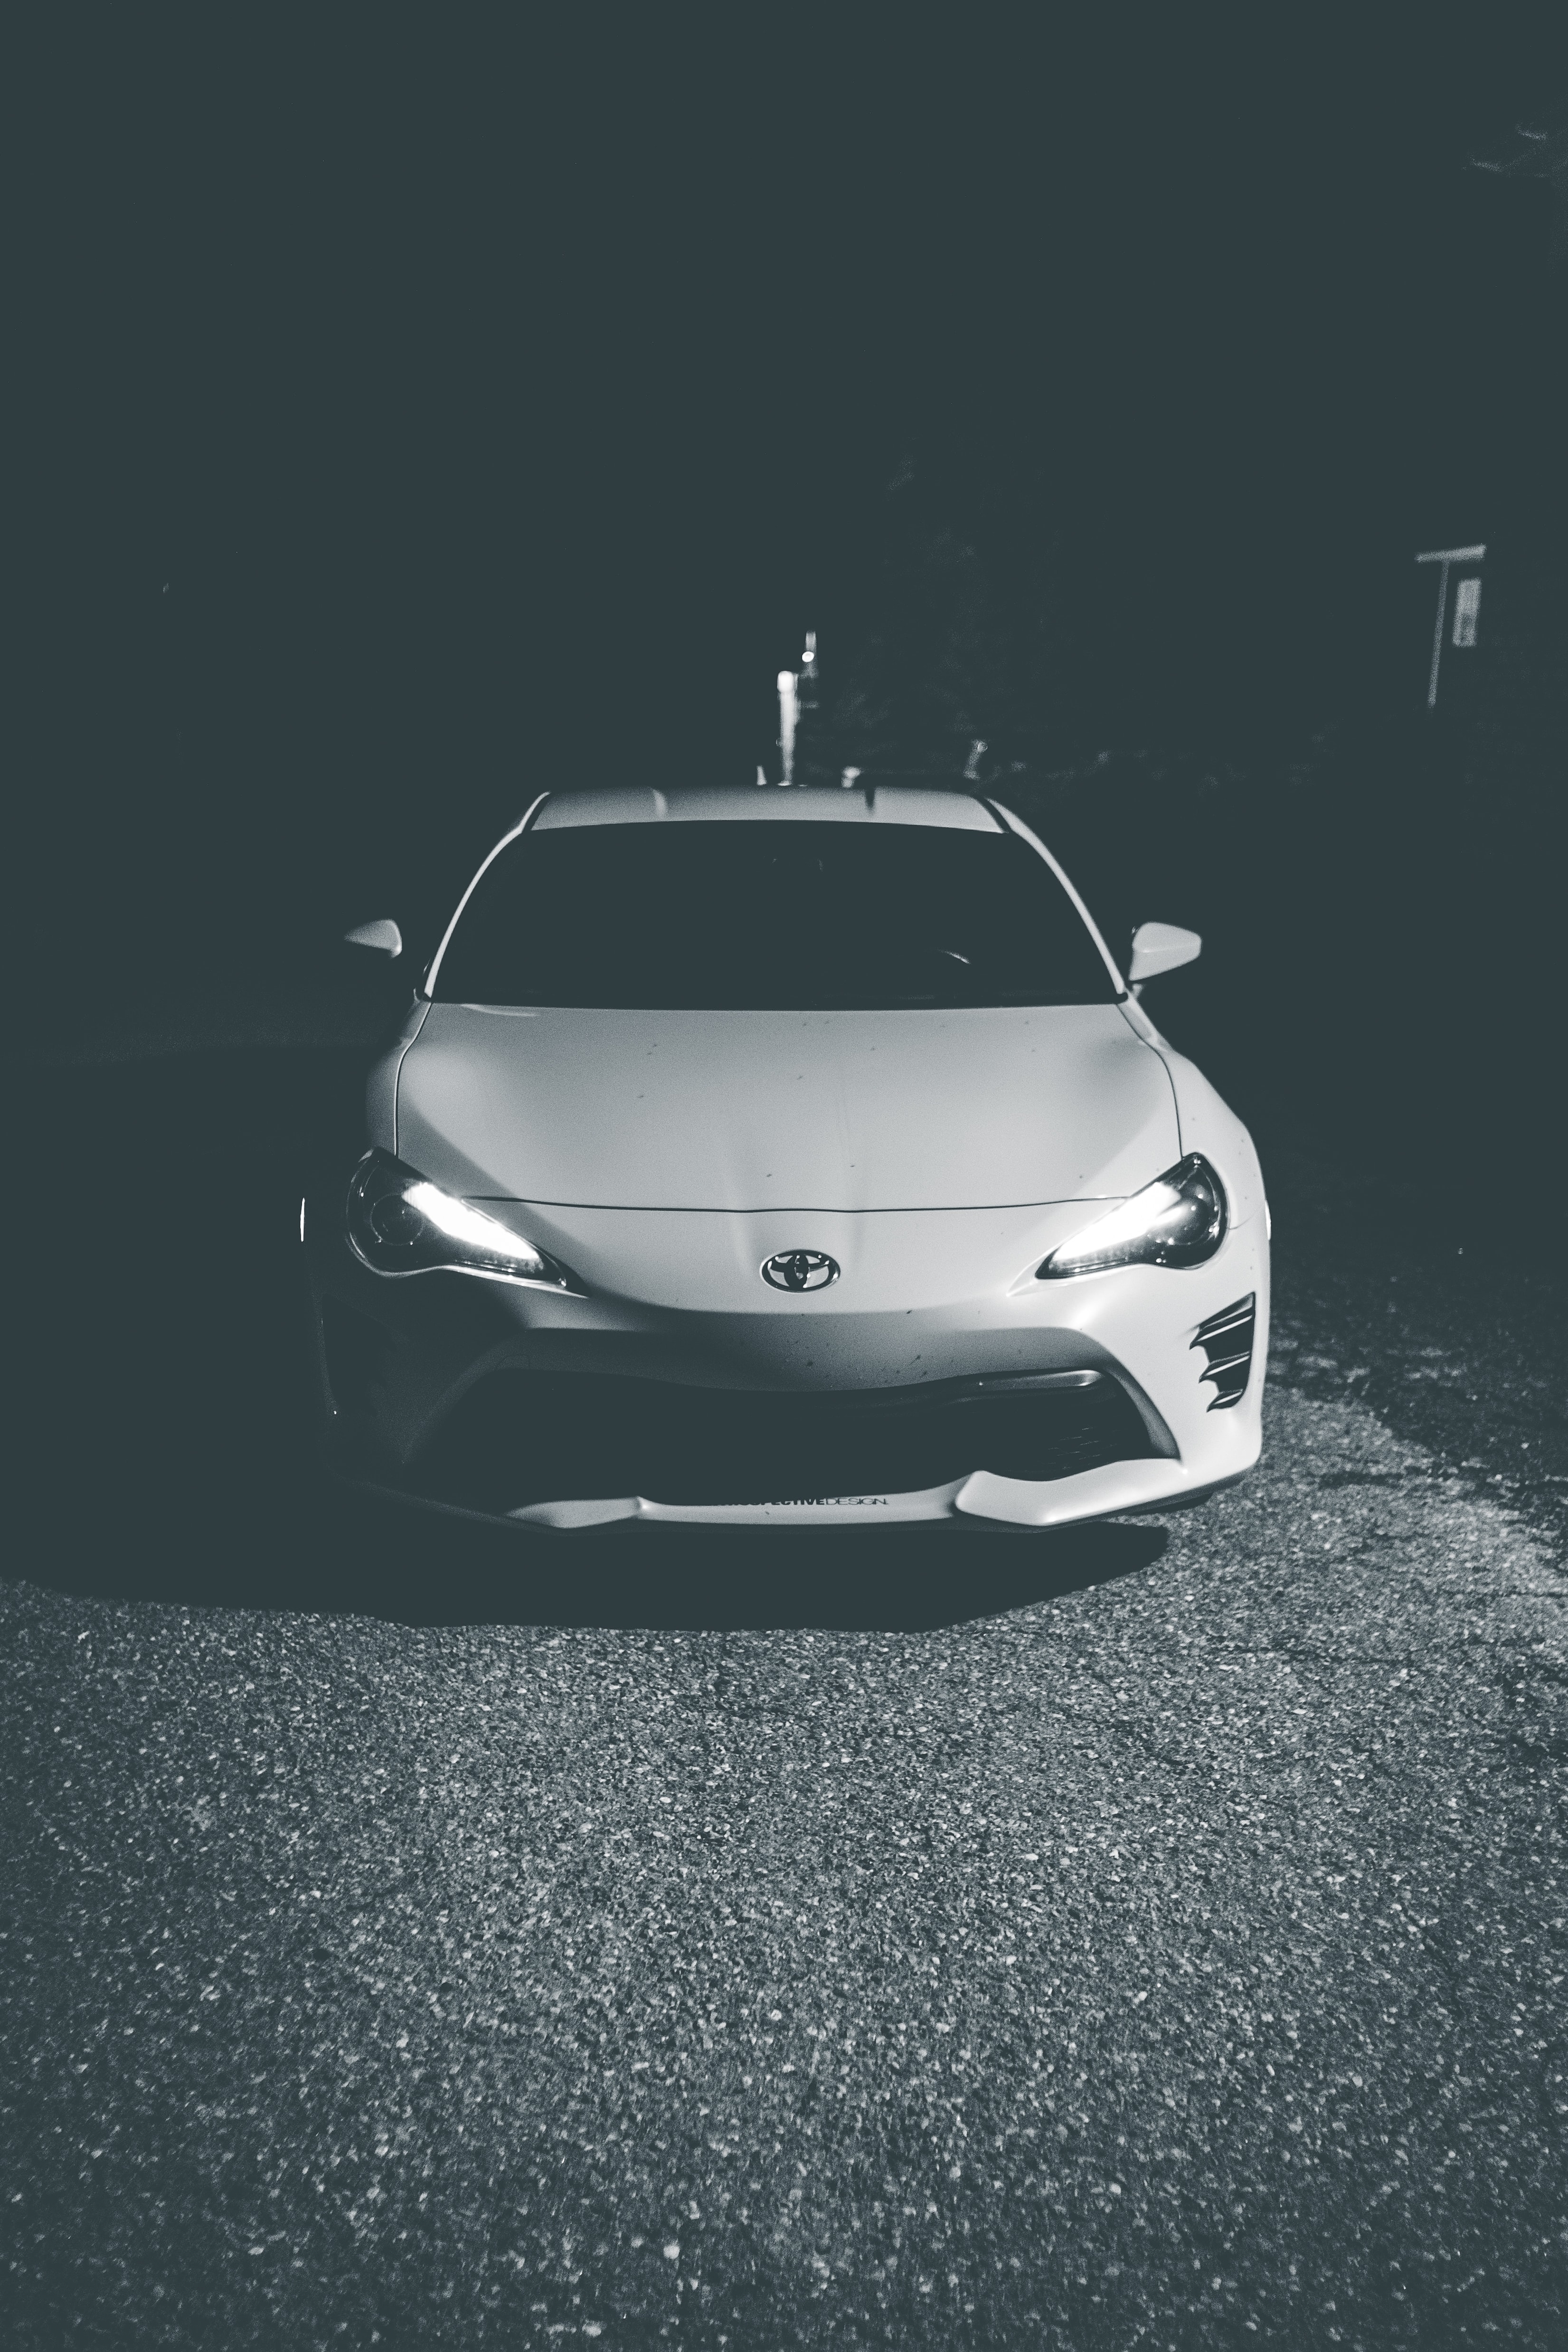 102149 download wallpaper toyota, cars, lights, car, front view, machine, bw, chb, headlights screensavers and pictures for free